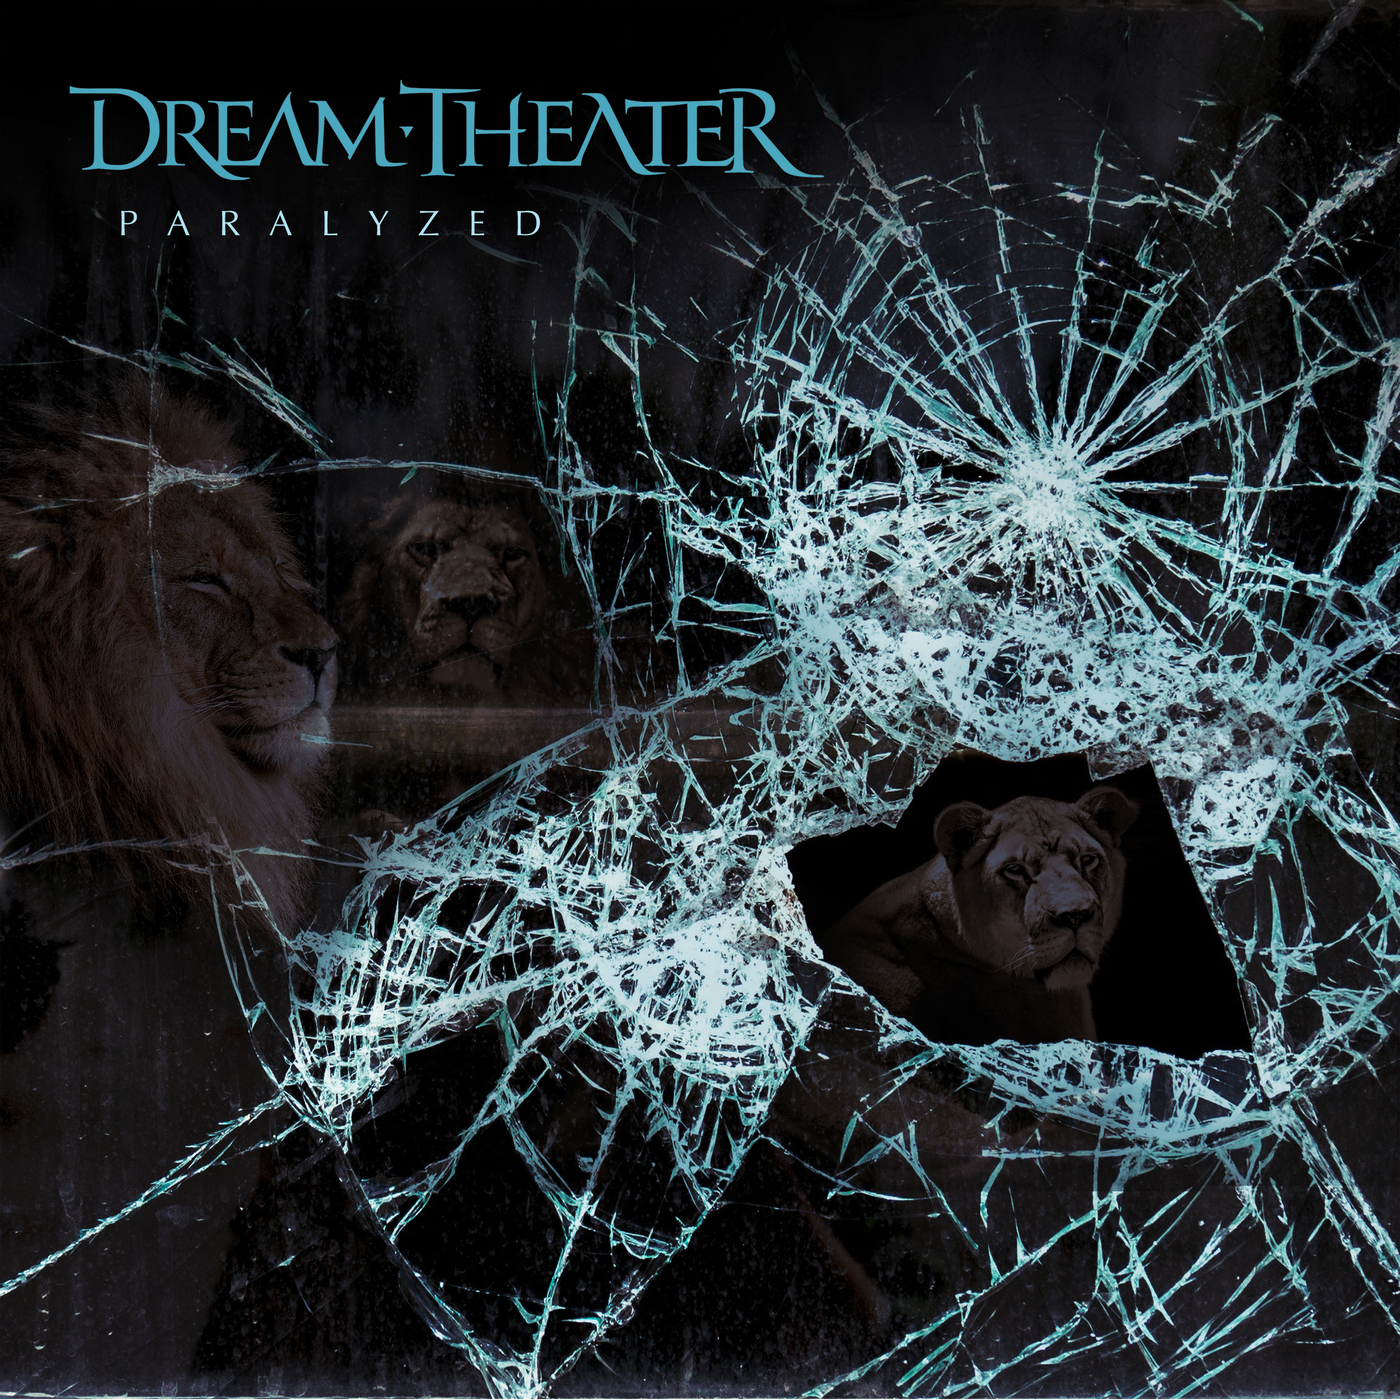 Dream theatre слушать. Dream Theater. Paralyzed. Dream Theater distance over time 2019. Dream Theater albums.